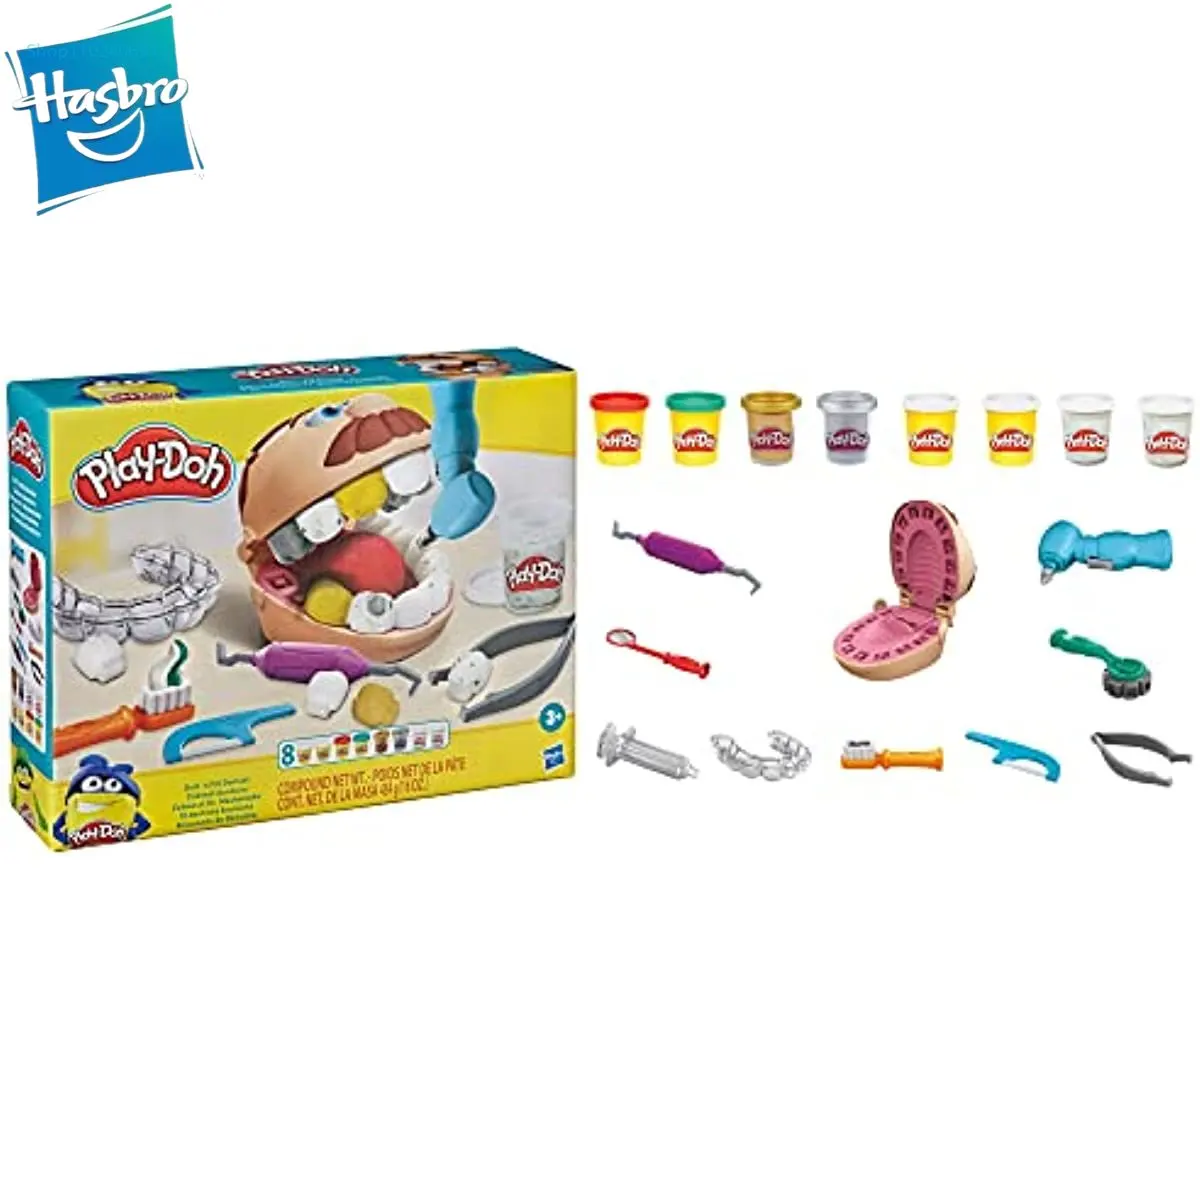 

Hasbro Play-Doh Drill 'n Fill Dentist Toy for Kids 3 Years and Up with Cavity and Metallic Colored Modeling Compound